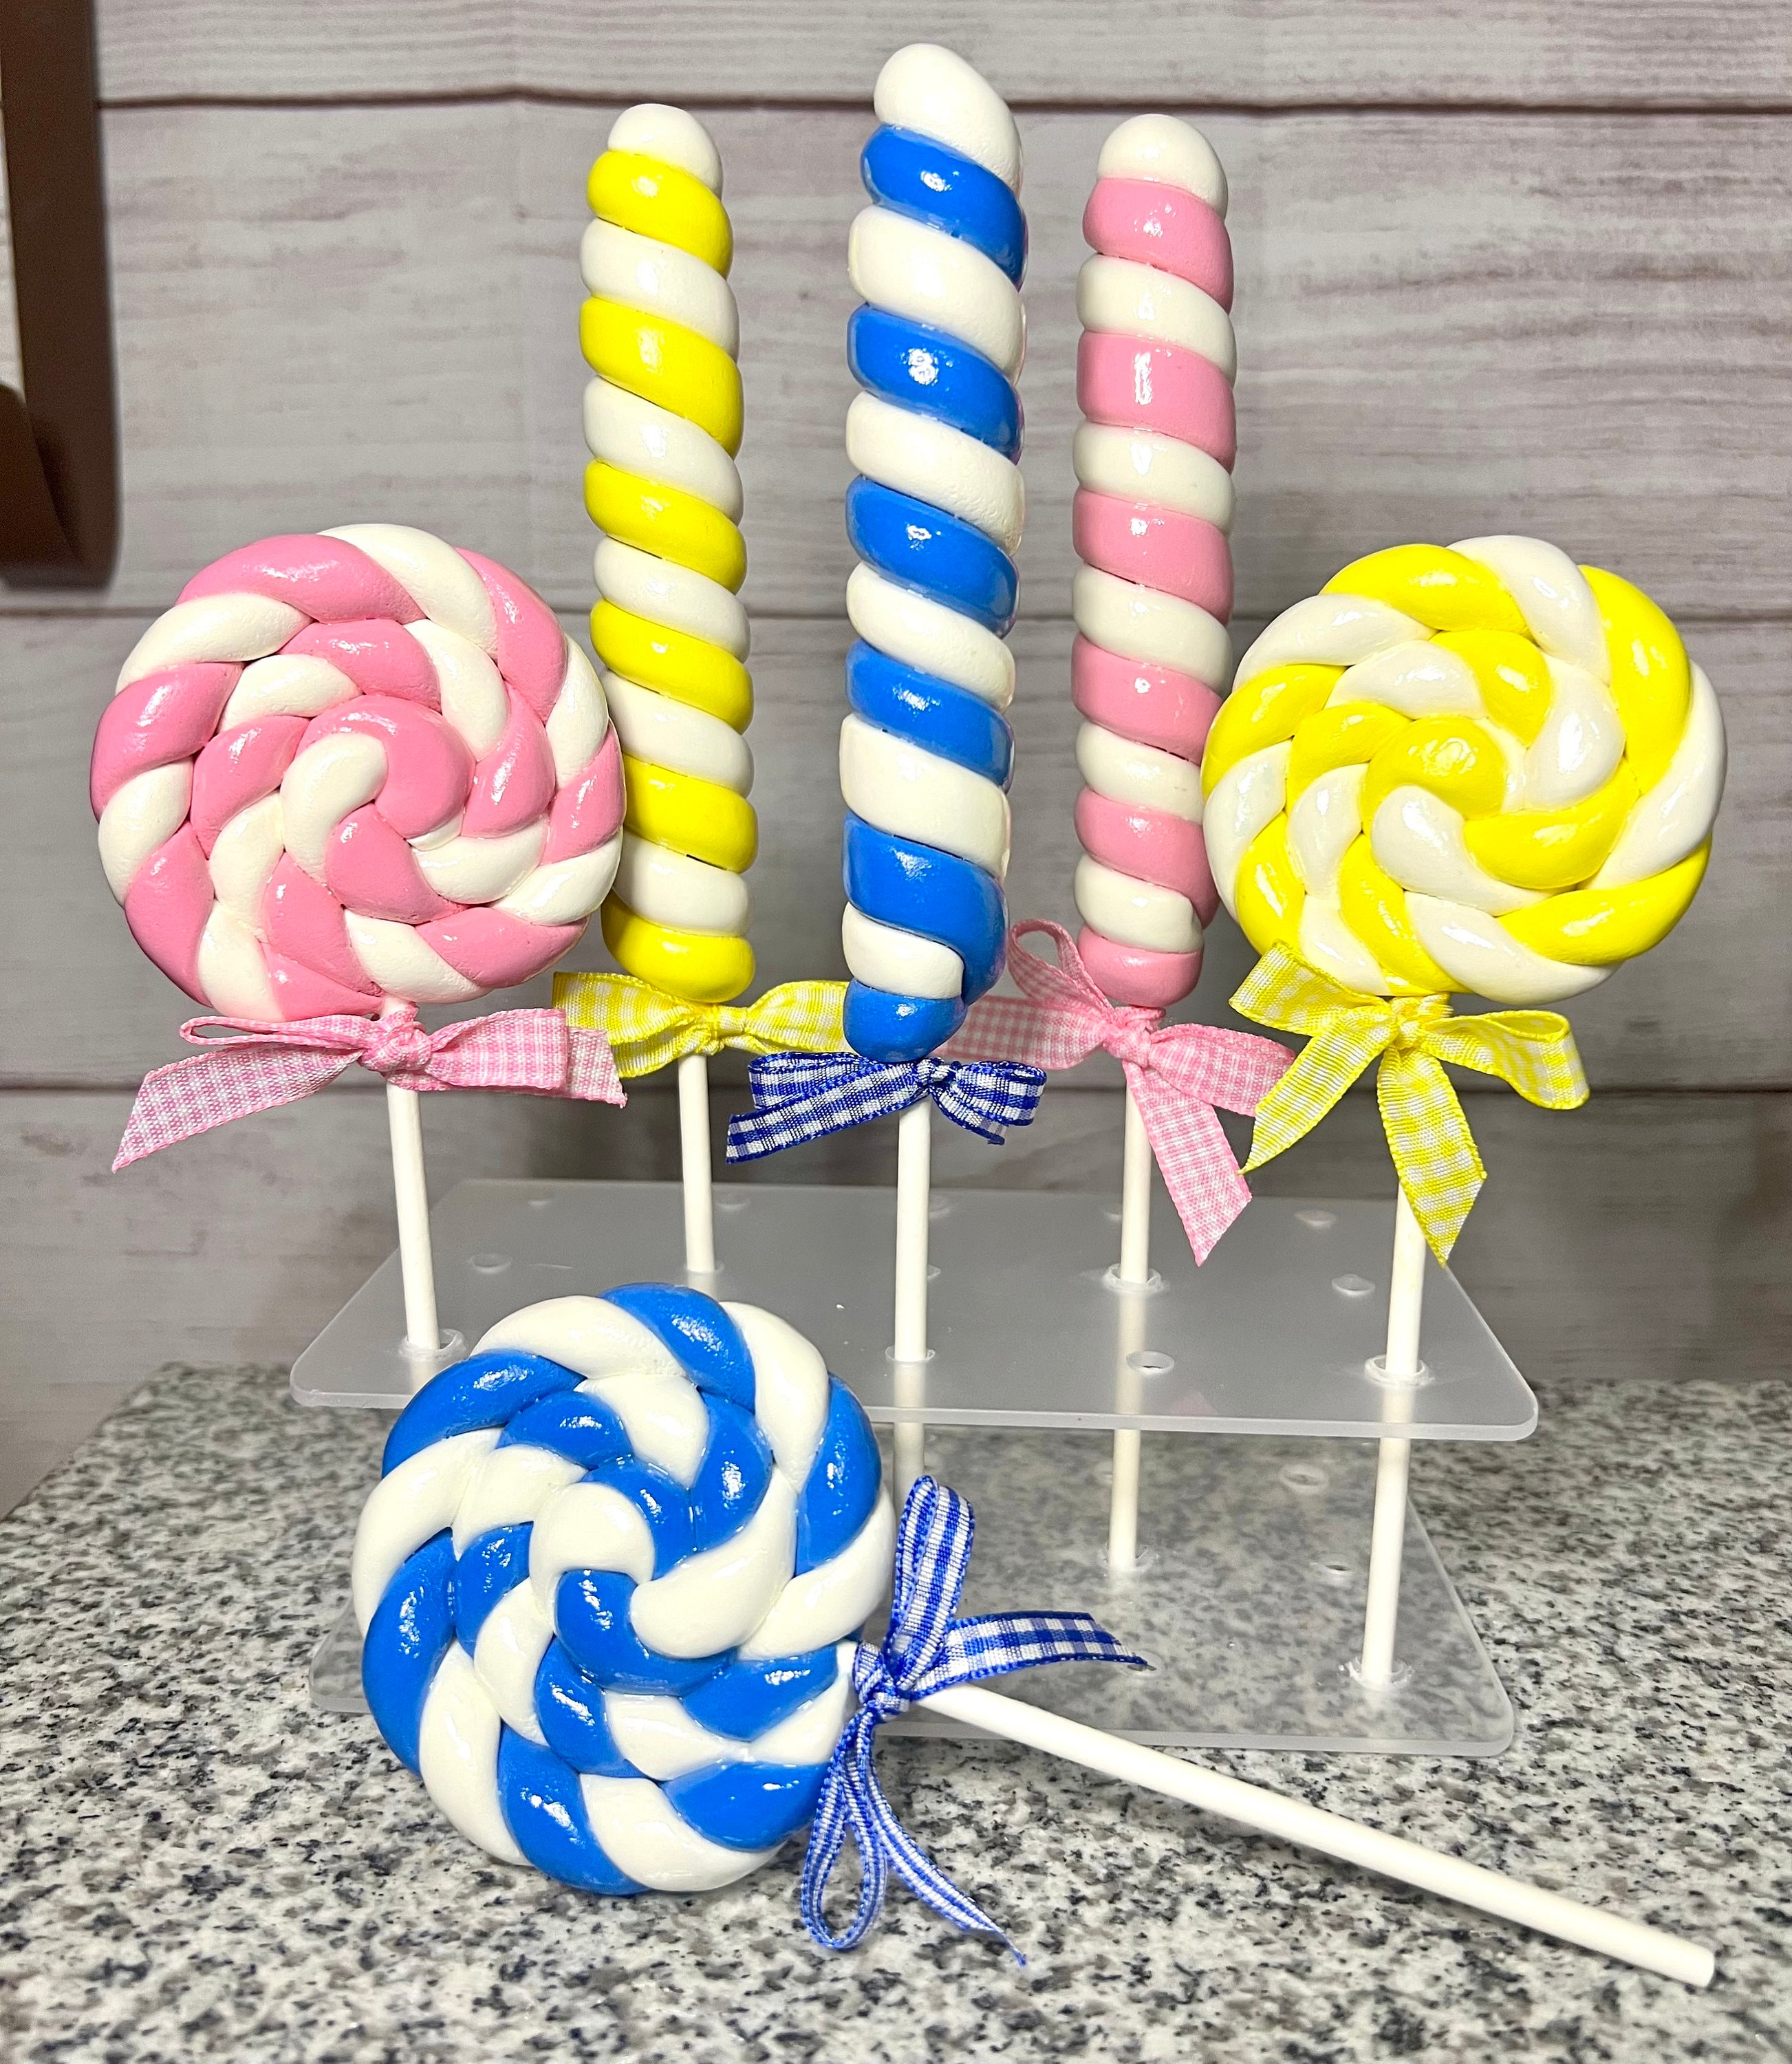 Wholesale fake candy decorations Available For Your Crafting Needs